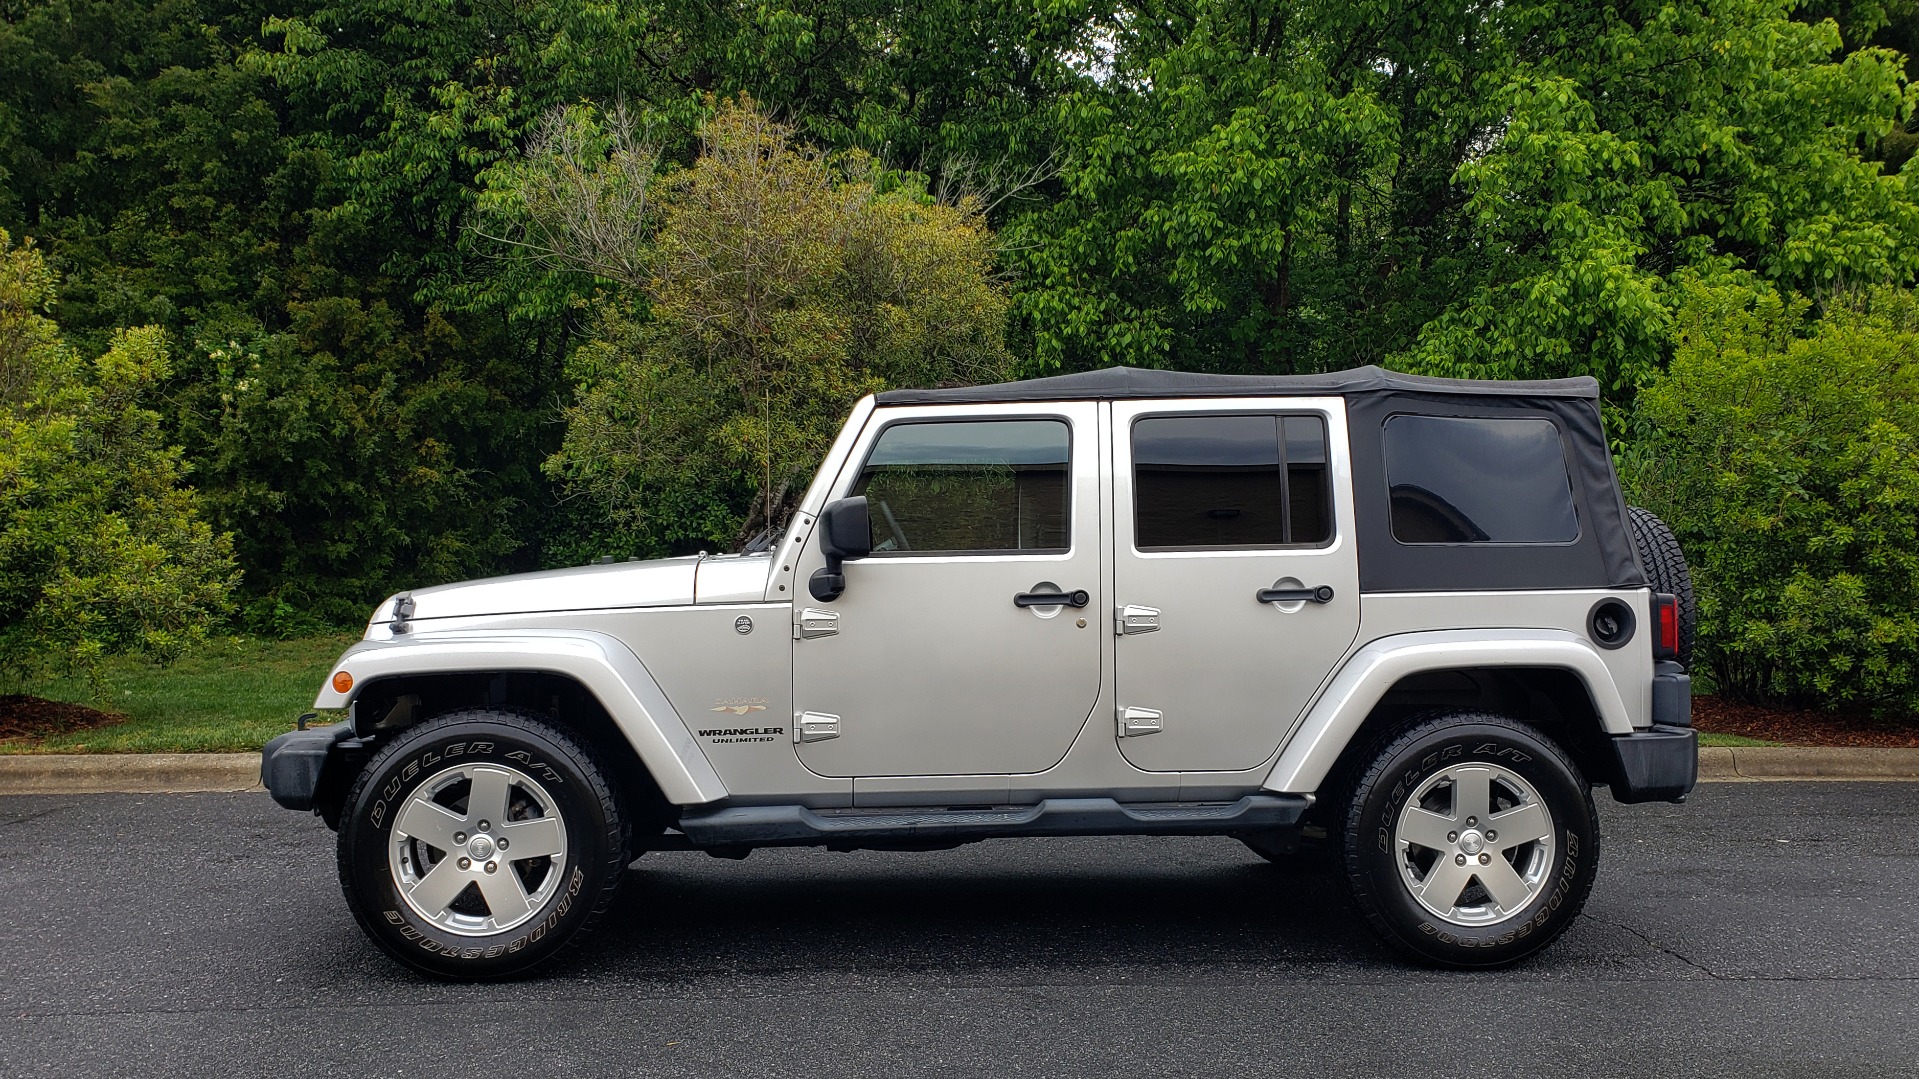 Used 2011 Jeep WRANGLER UNLIMITED SAHARA 4WD / 3-PC FREEDOM TOP / 6-SPD MANUAL for sale Sold at Formula Imports in Charlotte NC 28227 2